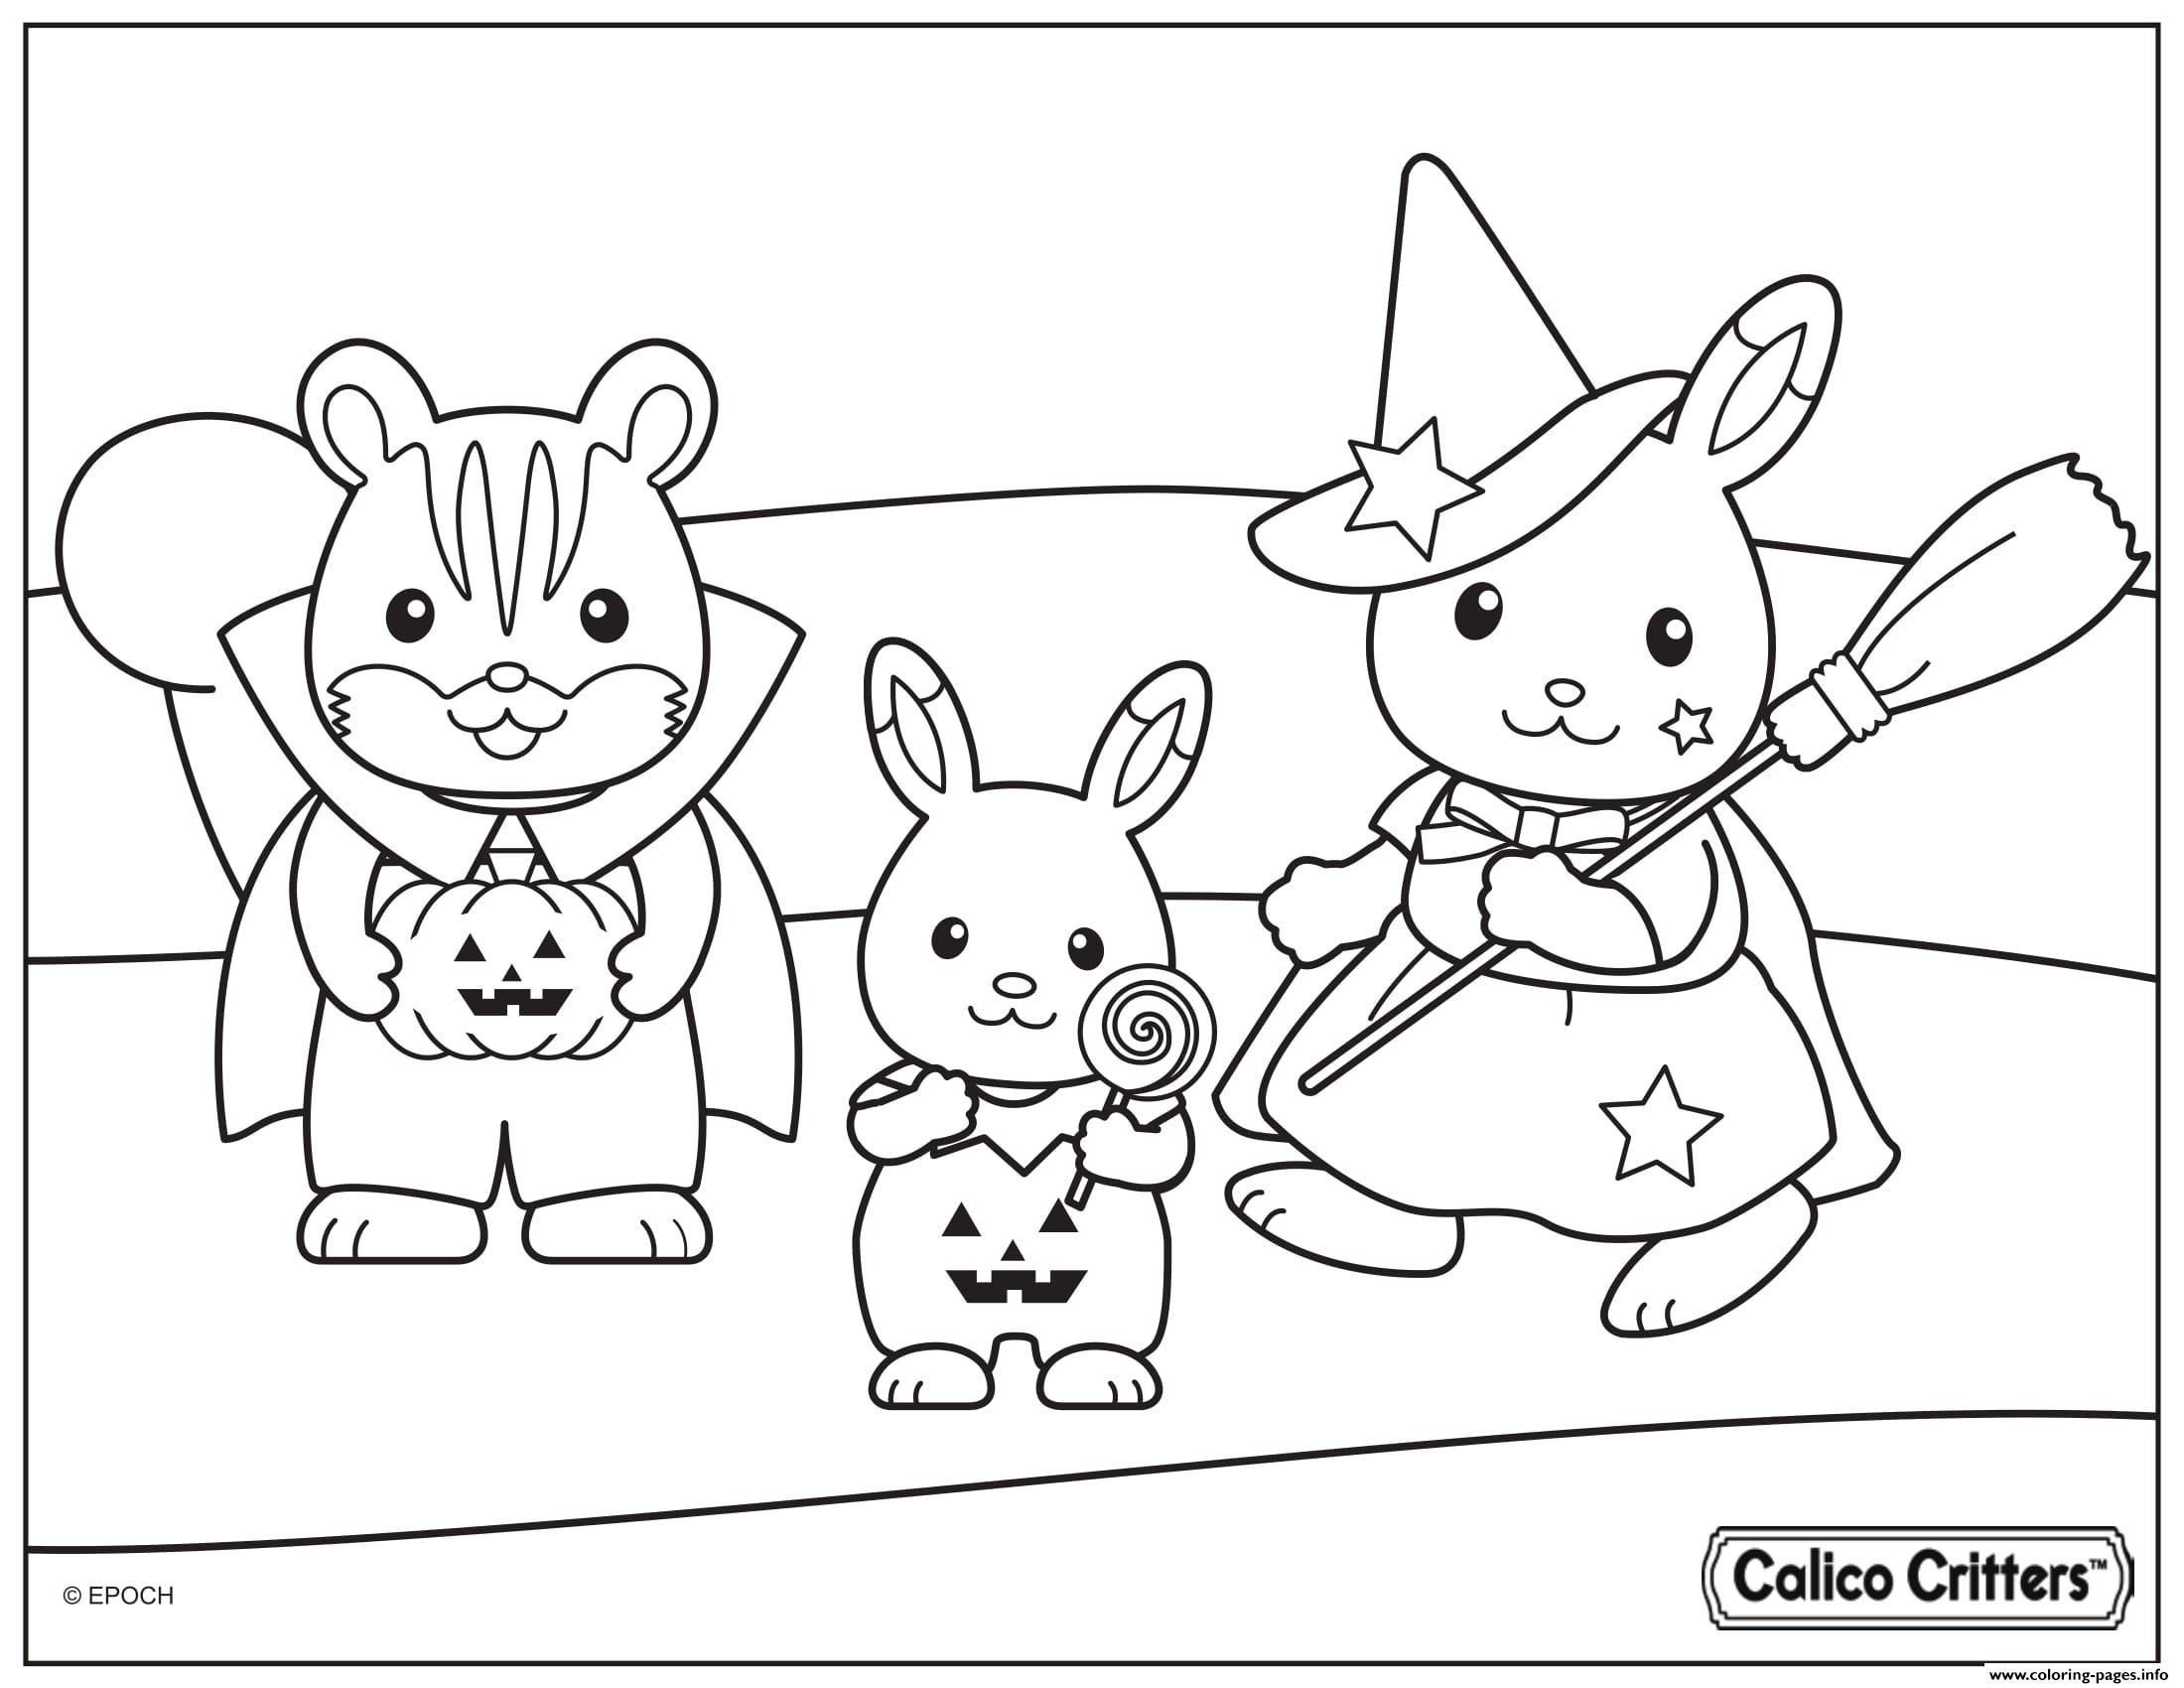 Calico Critters Coloring Pages
 Calico Critters Halloween Costumes Coloring Pages Printable